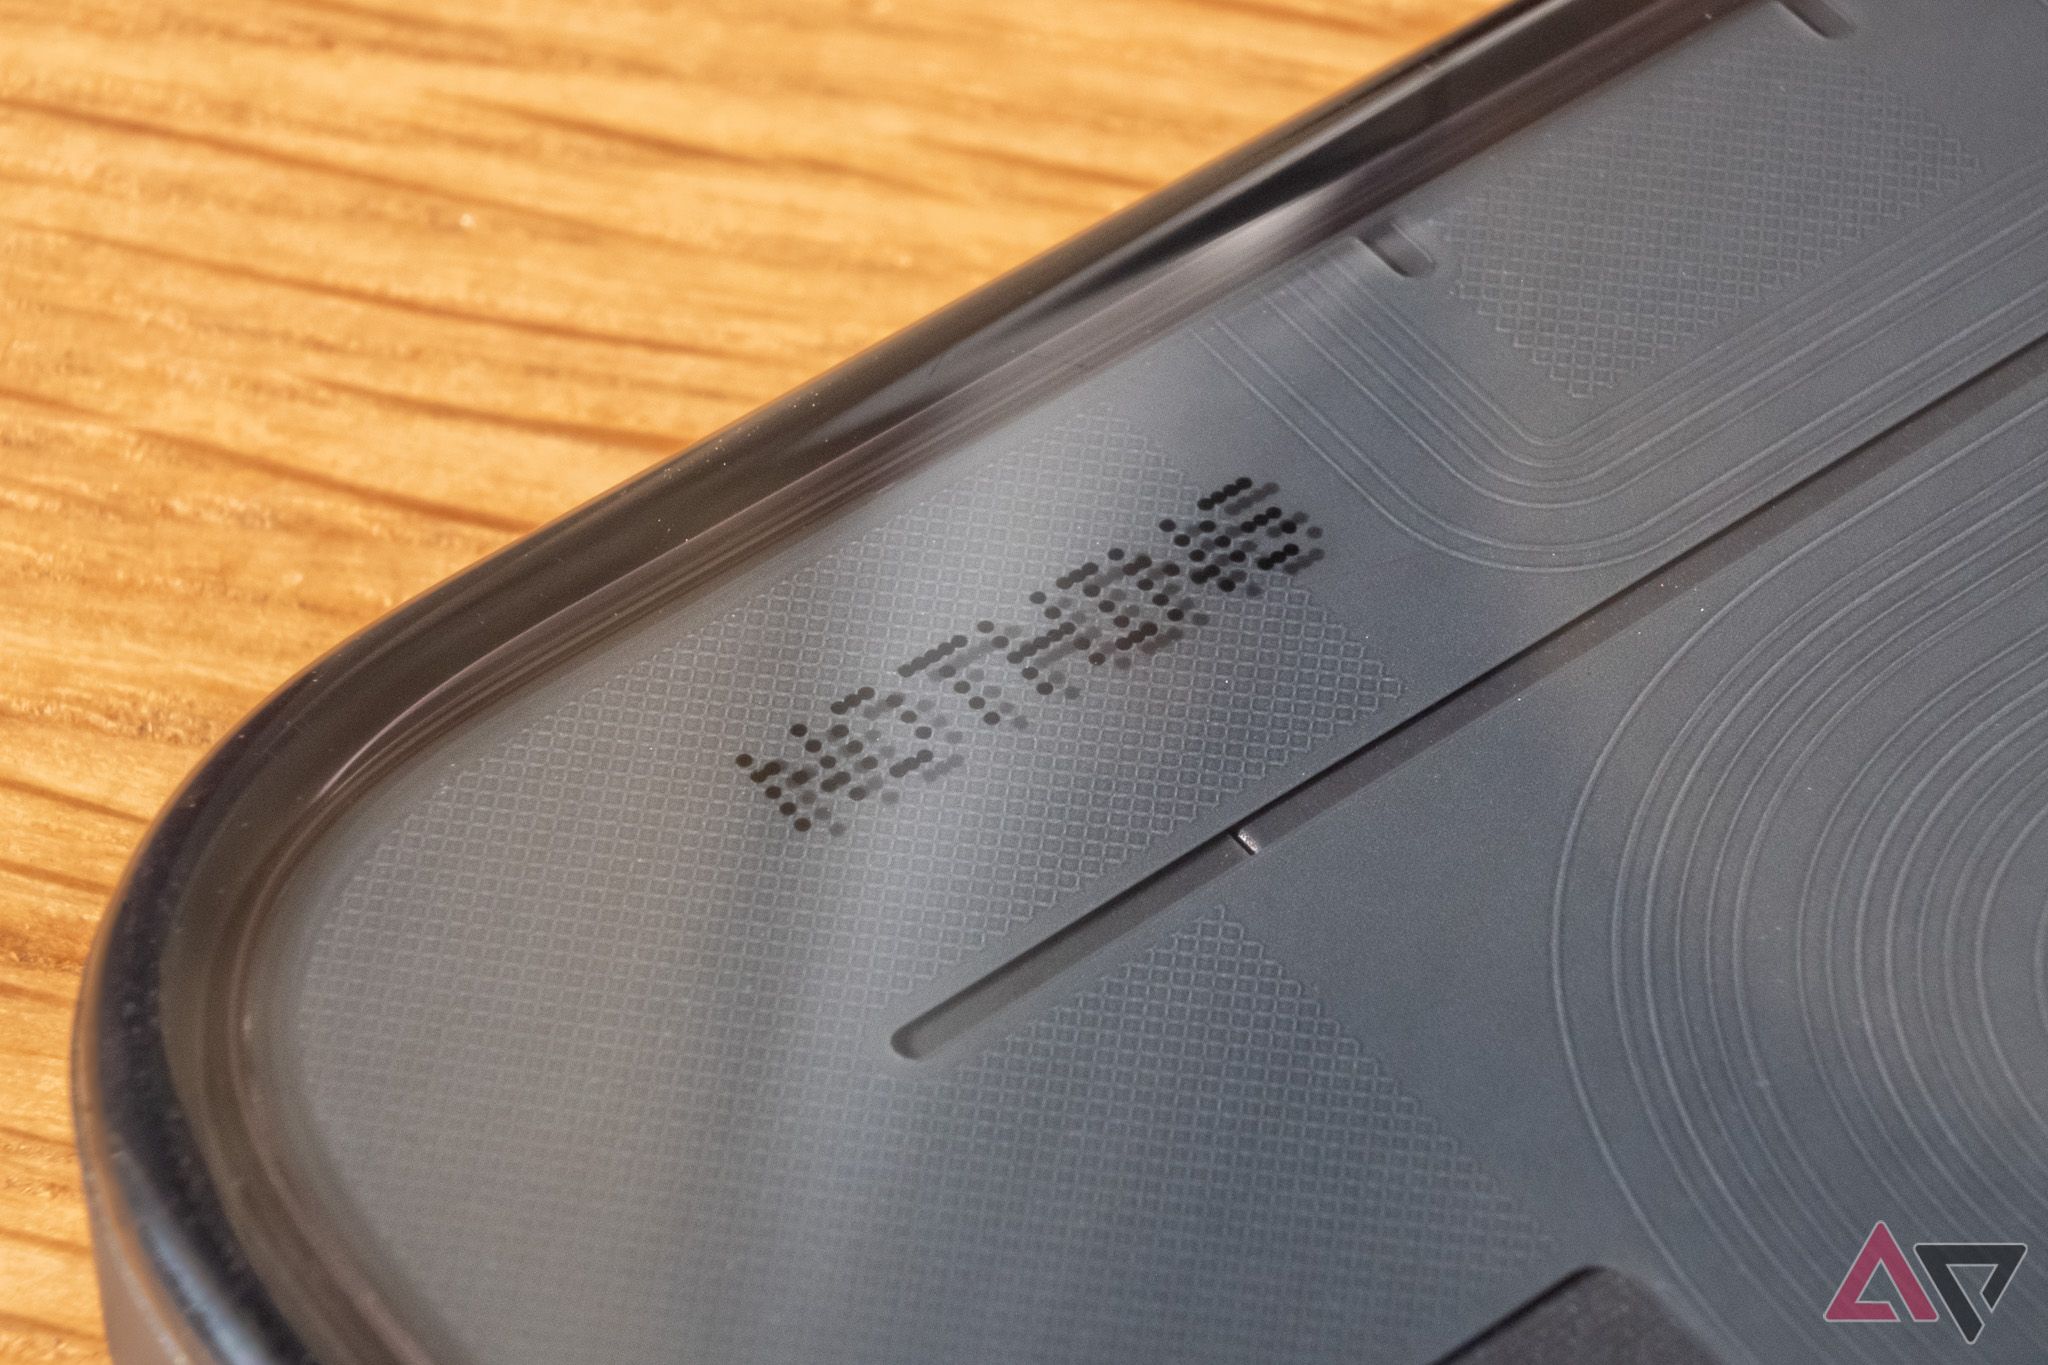 A close-up of Nothing's wordmark on the back of a phone